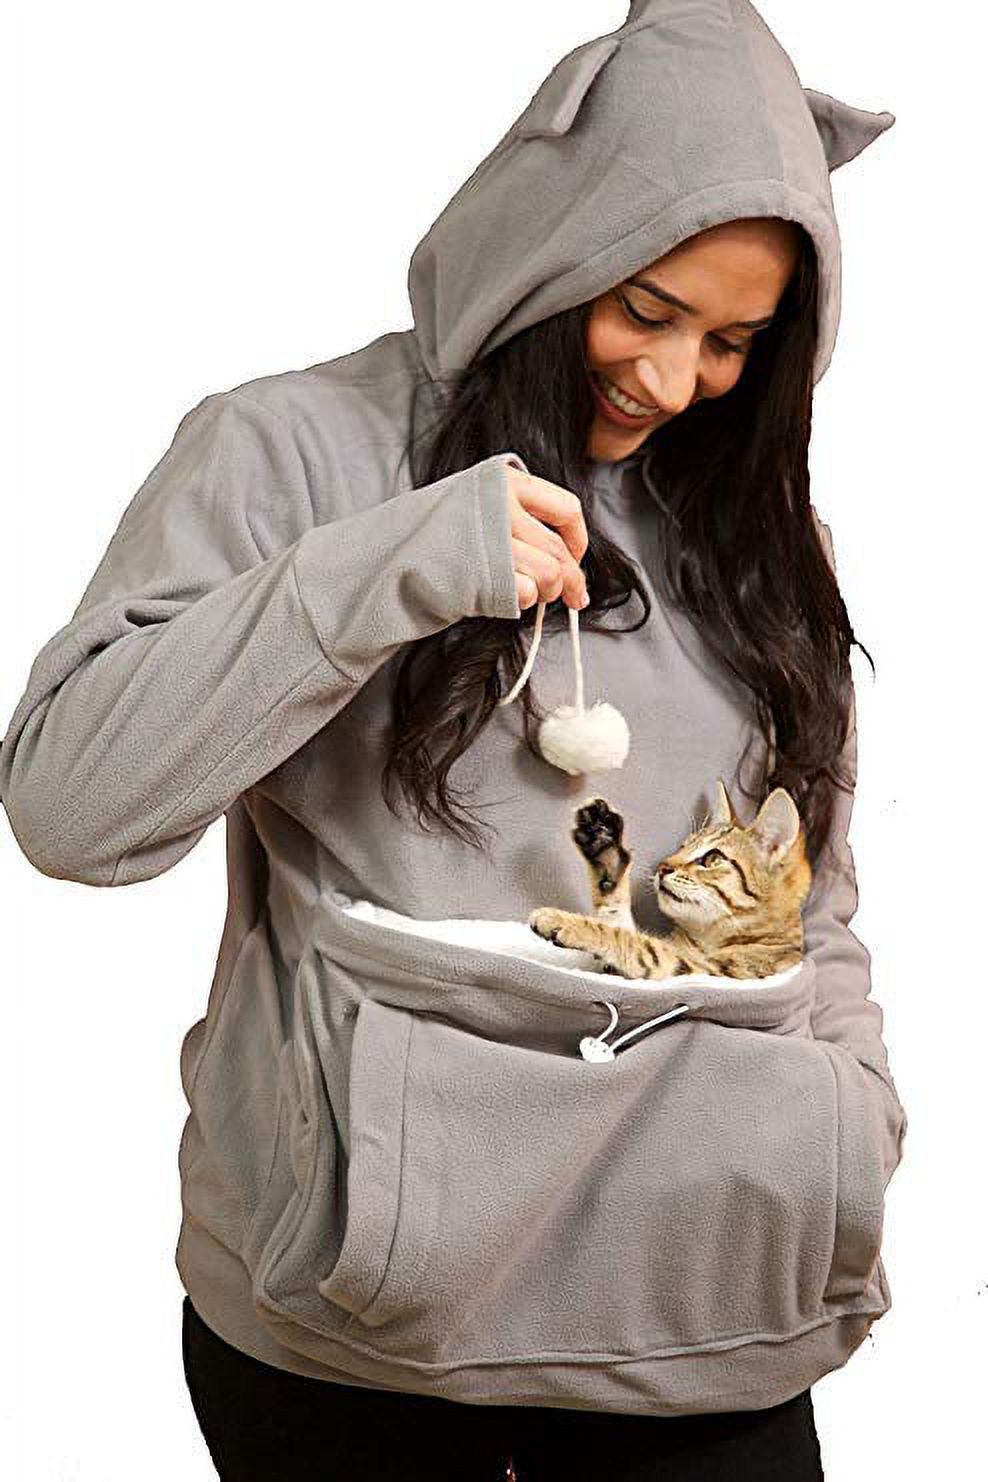 KITTYROO Cat Hoodie, The Original AS SEEN ON TV Kitty Carrying Sweatshirt, with Super Soft Kangaroo Pet Pouch (Large) - image 1 of 5